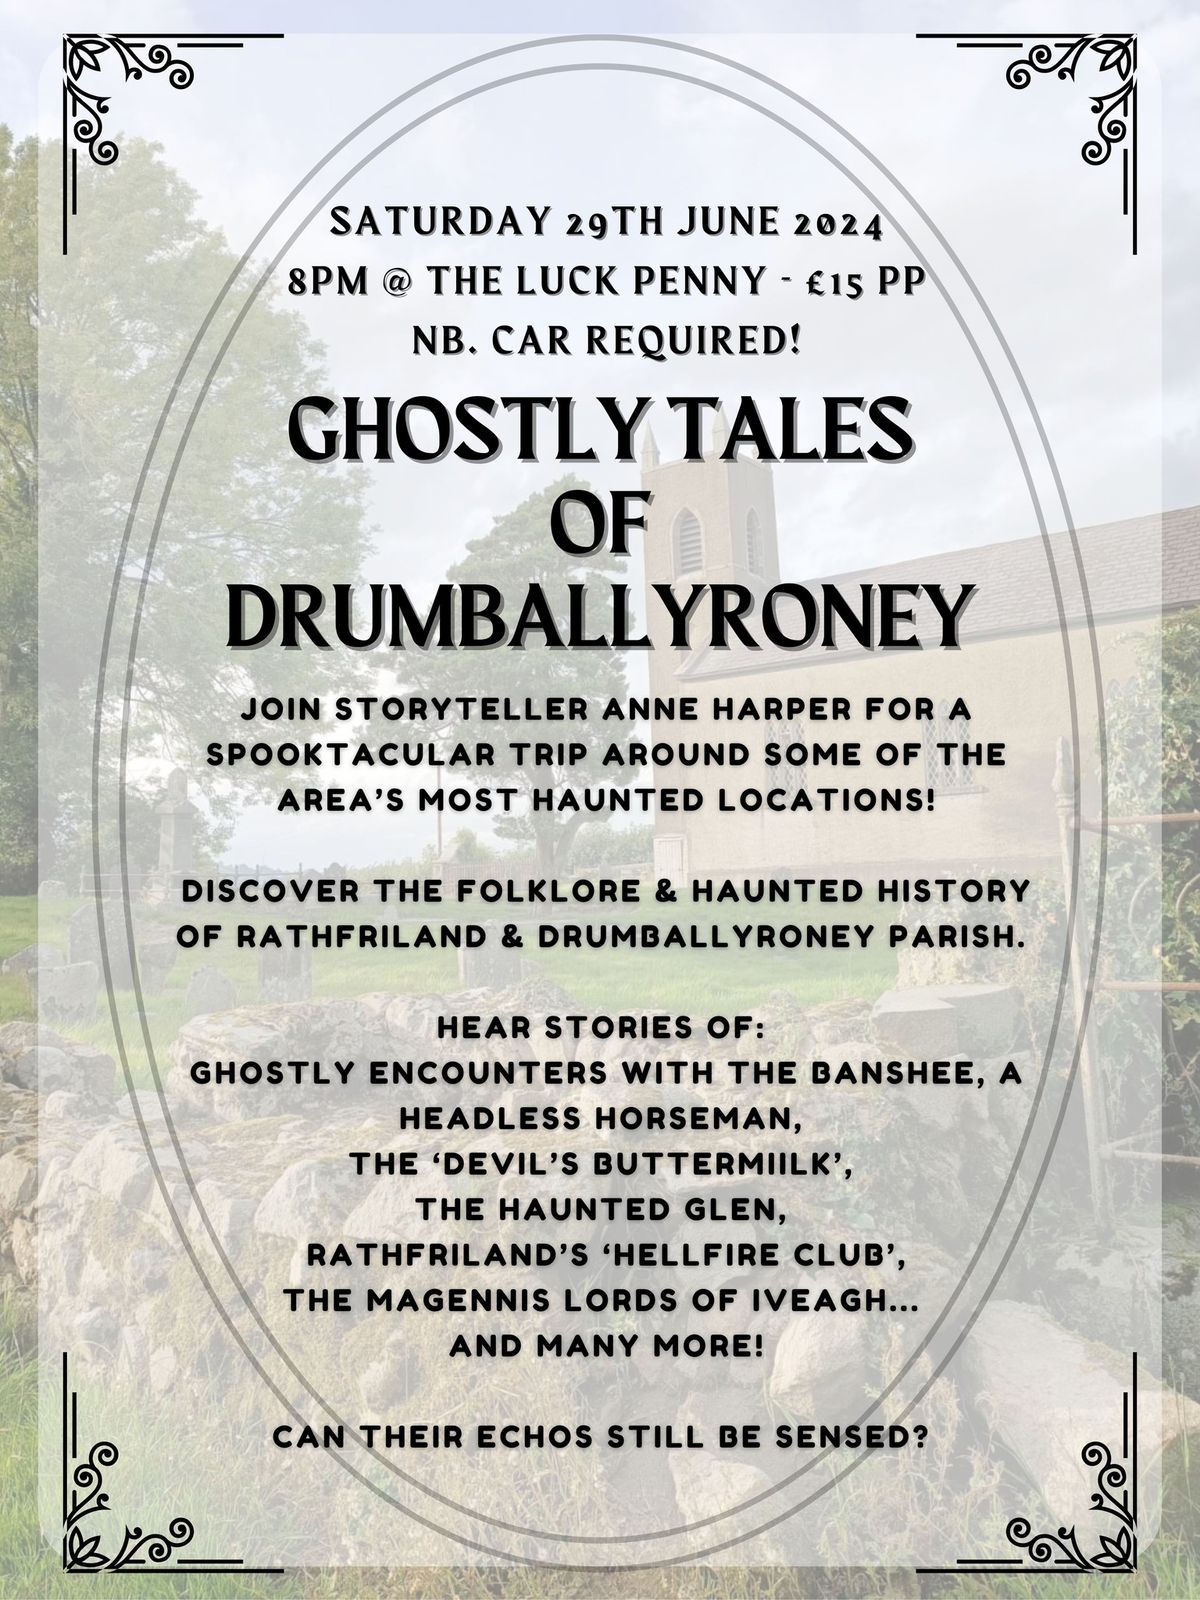 Rathfriland & Drumballyroney Ghost Story Tour